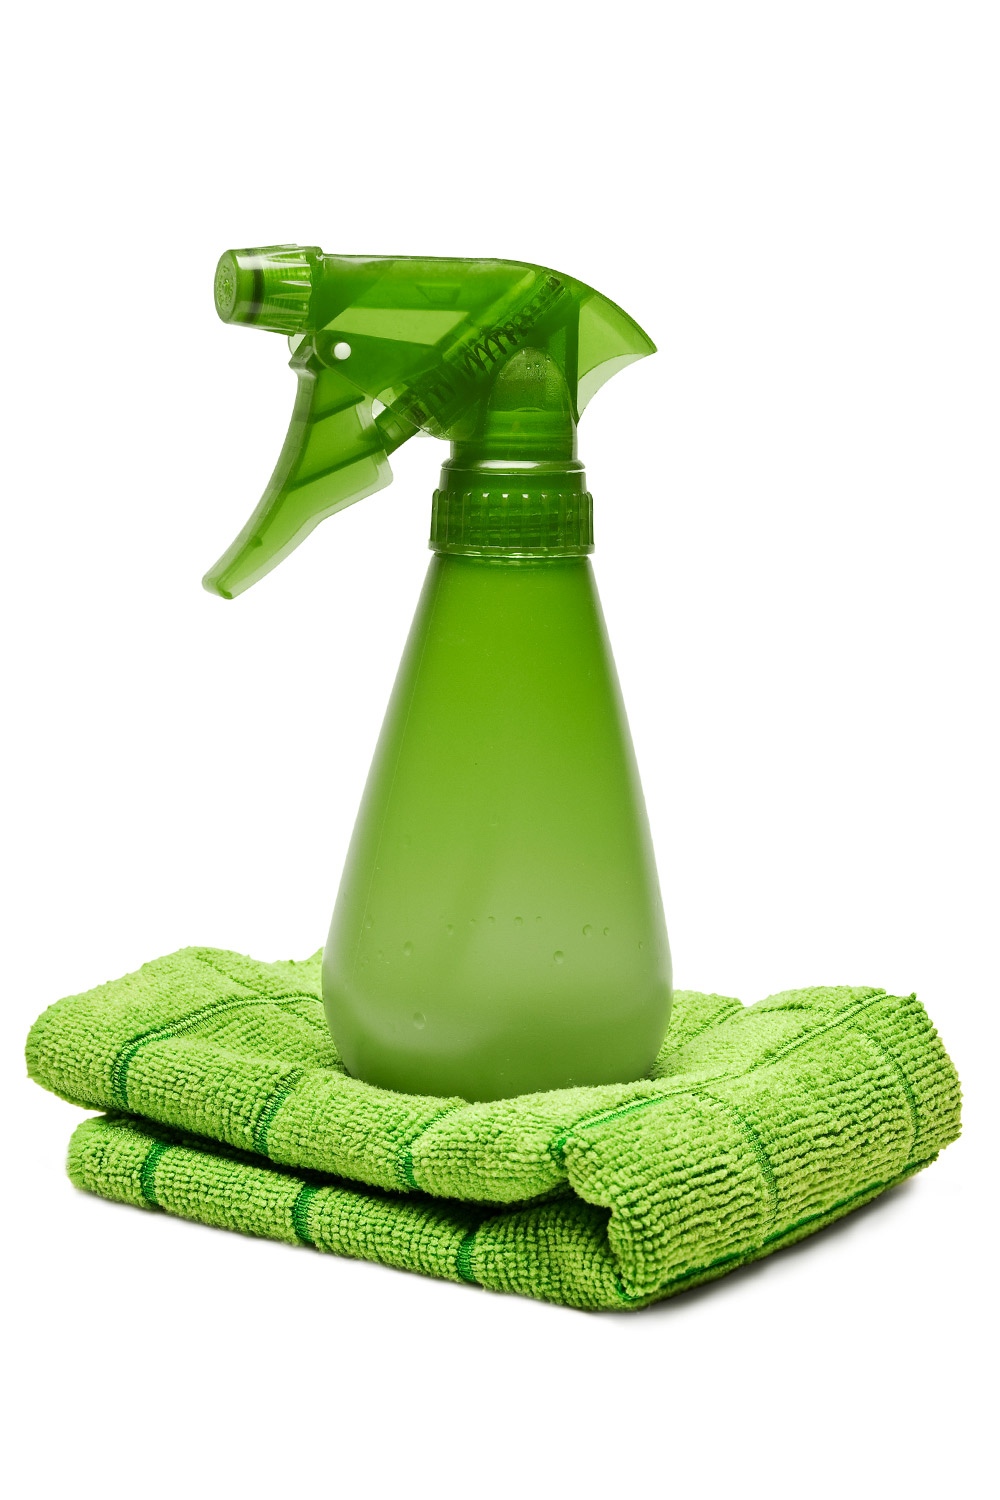 To make your own window cleaner add to cup of vinegar to gallon of water